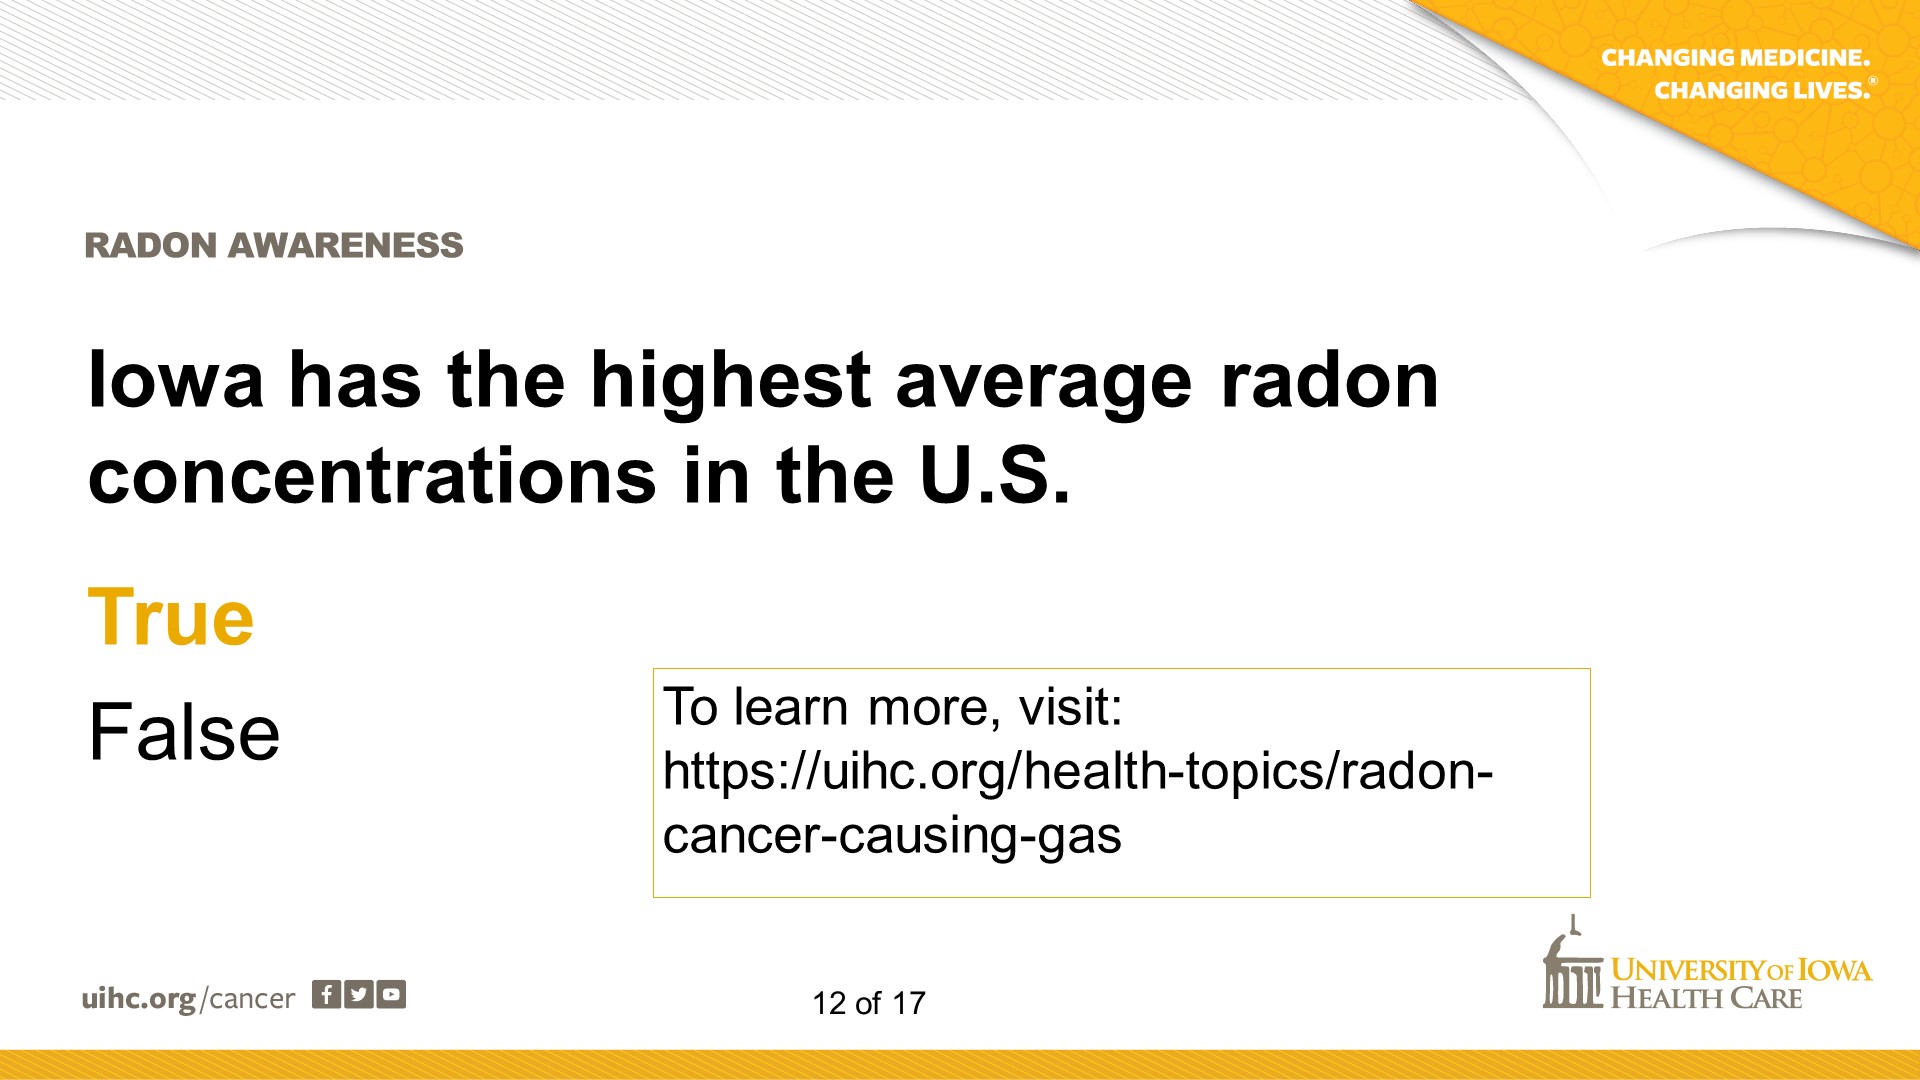 True - to learn more visit uihc.org/health-topics/radon-cancer-causing-gas